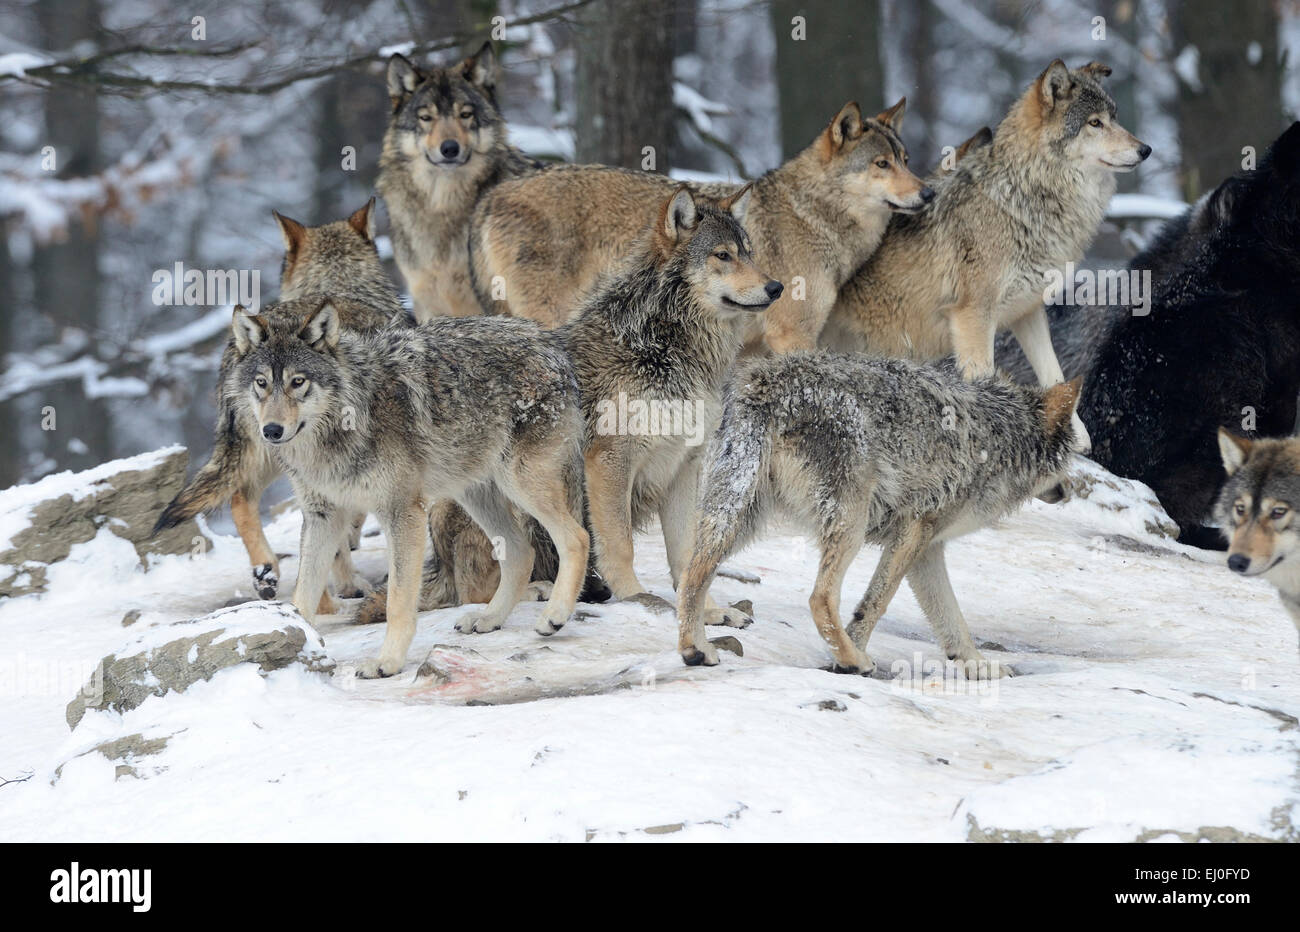 Wolf, animal, predator, wolves, predators, gray wolf, canids, Canis lupus lycaon, Germany, Europe, Stock Photo